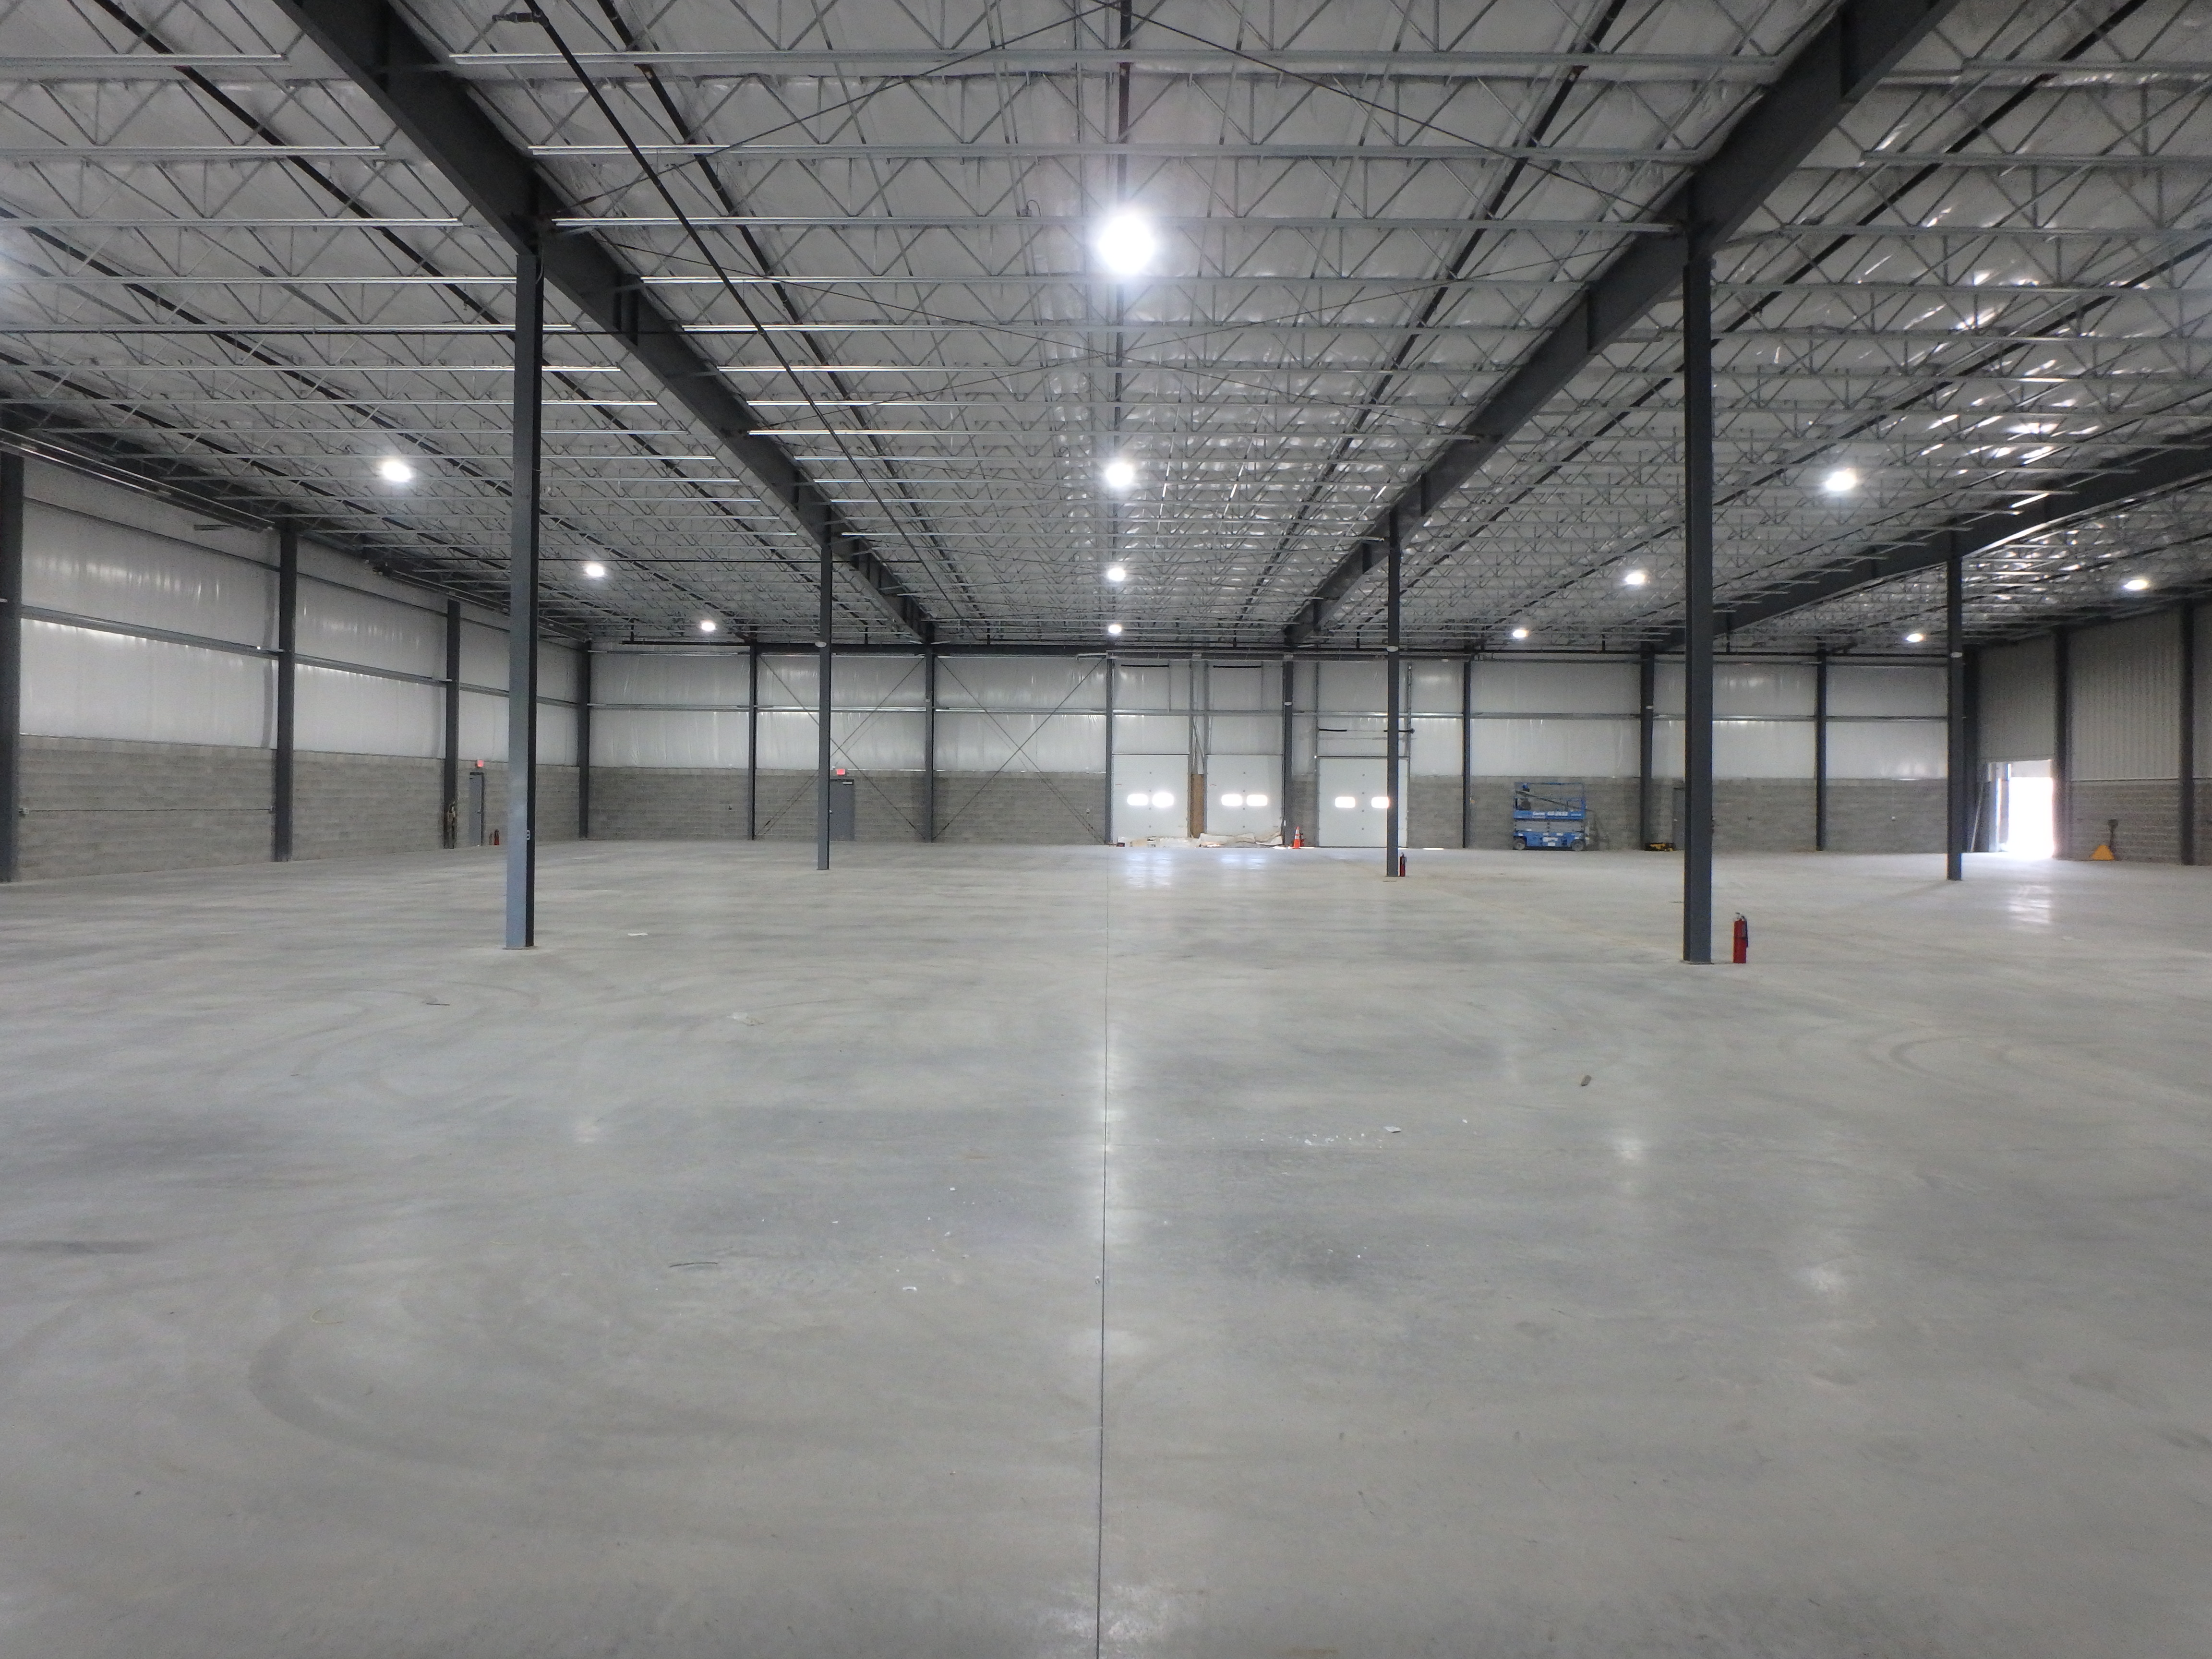 Leased 45,000 sq ft